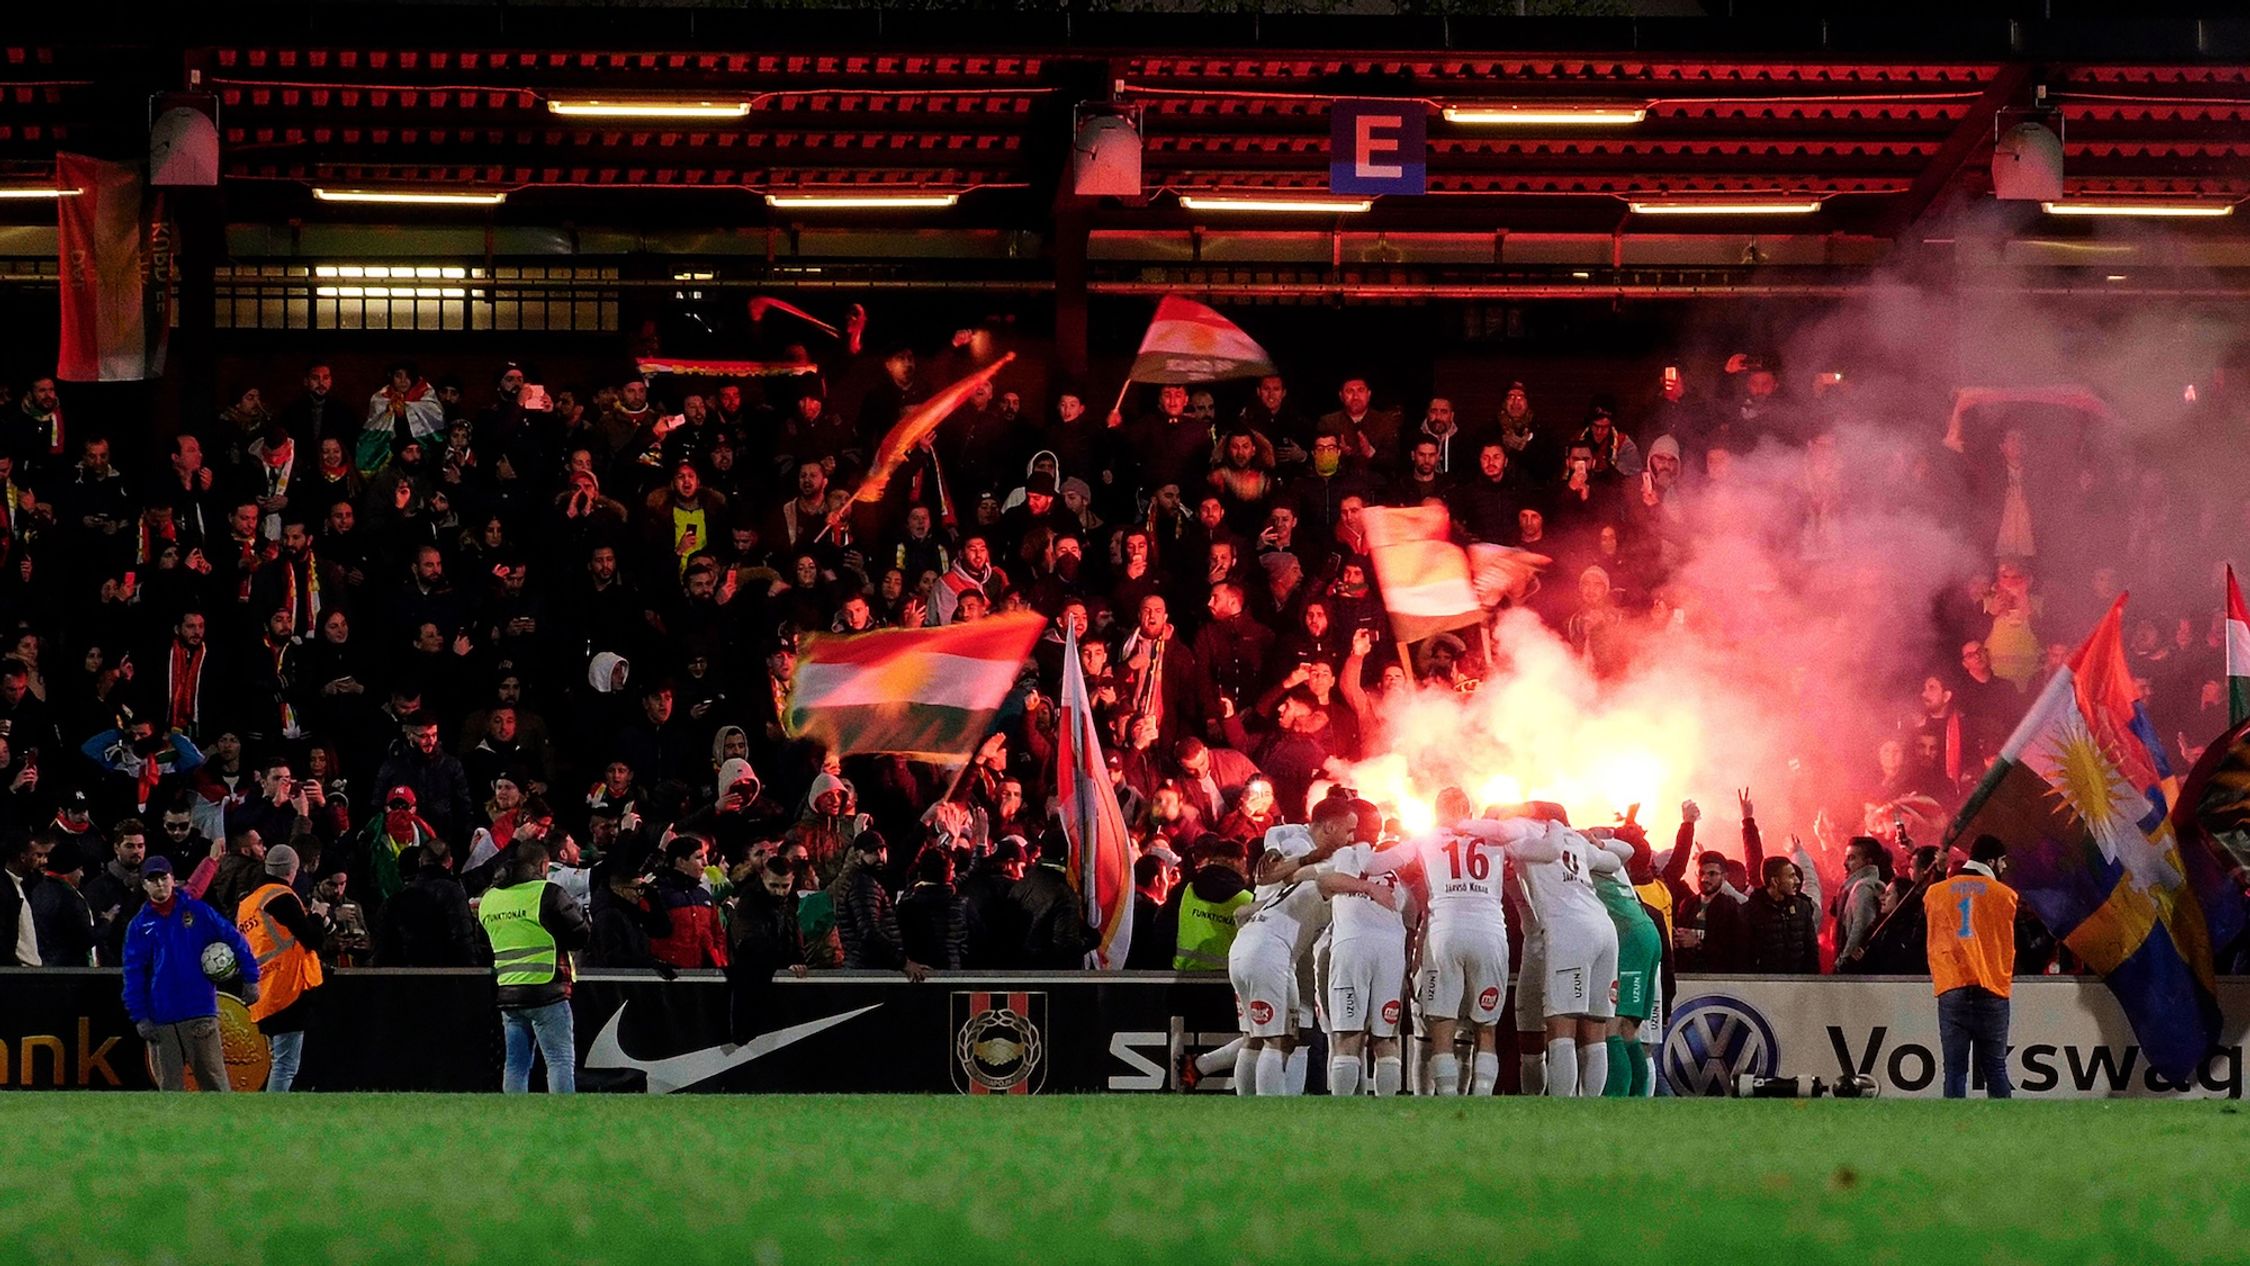 A group of soccer players are huddled together, celebrating near the edge of the field. They are surrounded by vibrant flares and smoke, mostly in red, adding to the dramatic atmosphere. In the background, the crowd is animated, with some fans waving flags energetically. The scene is at night, under artificial lighting, and captures the energy and excitement typical of a soccer match.